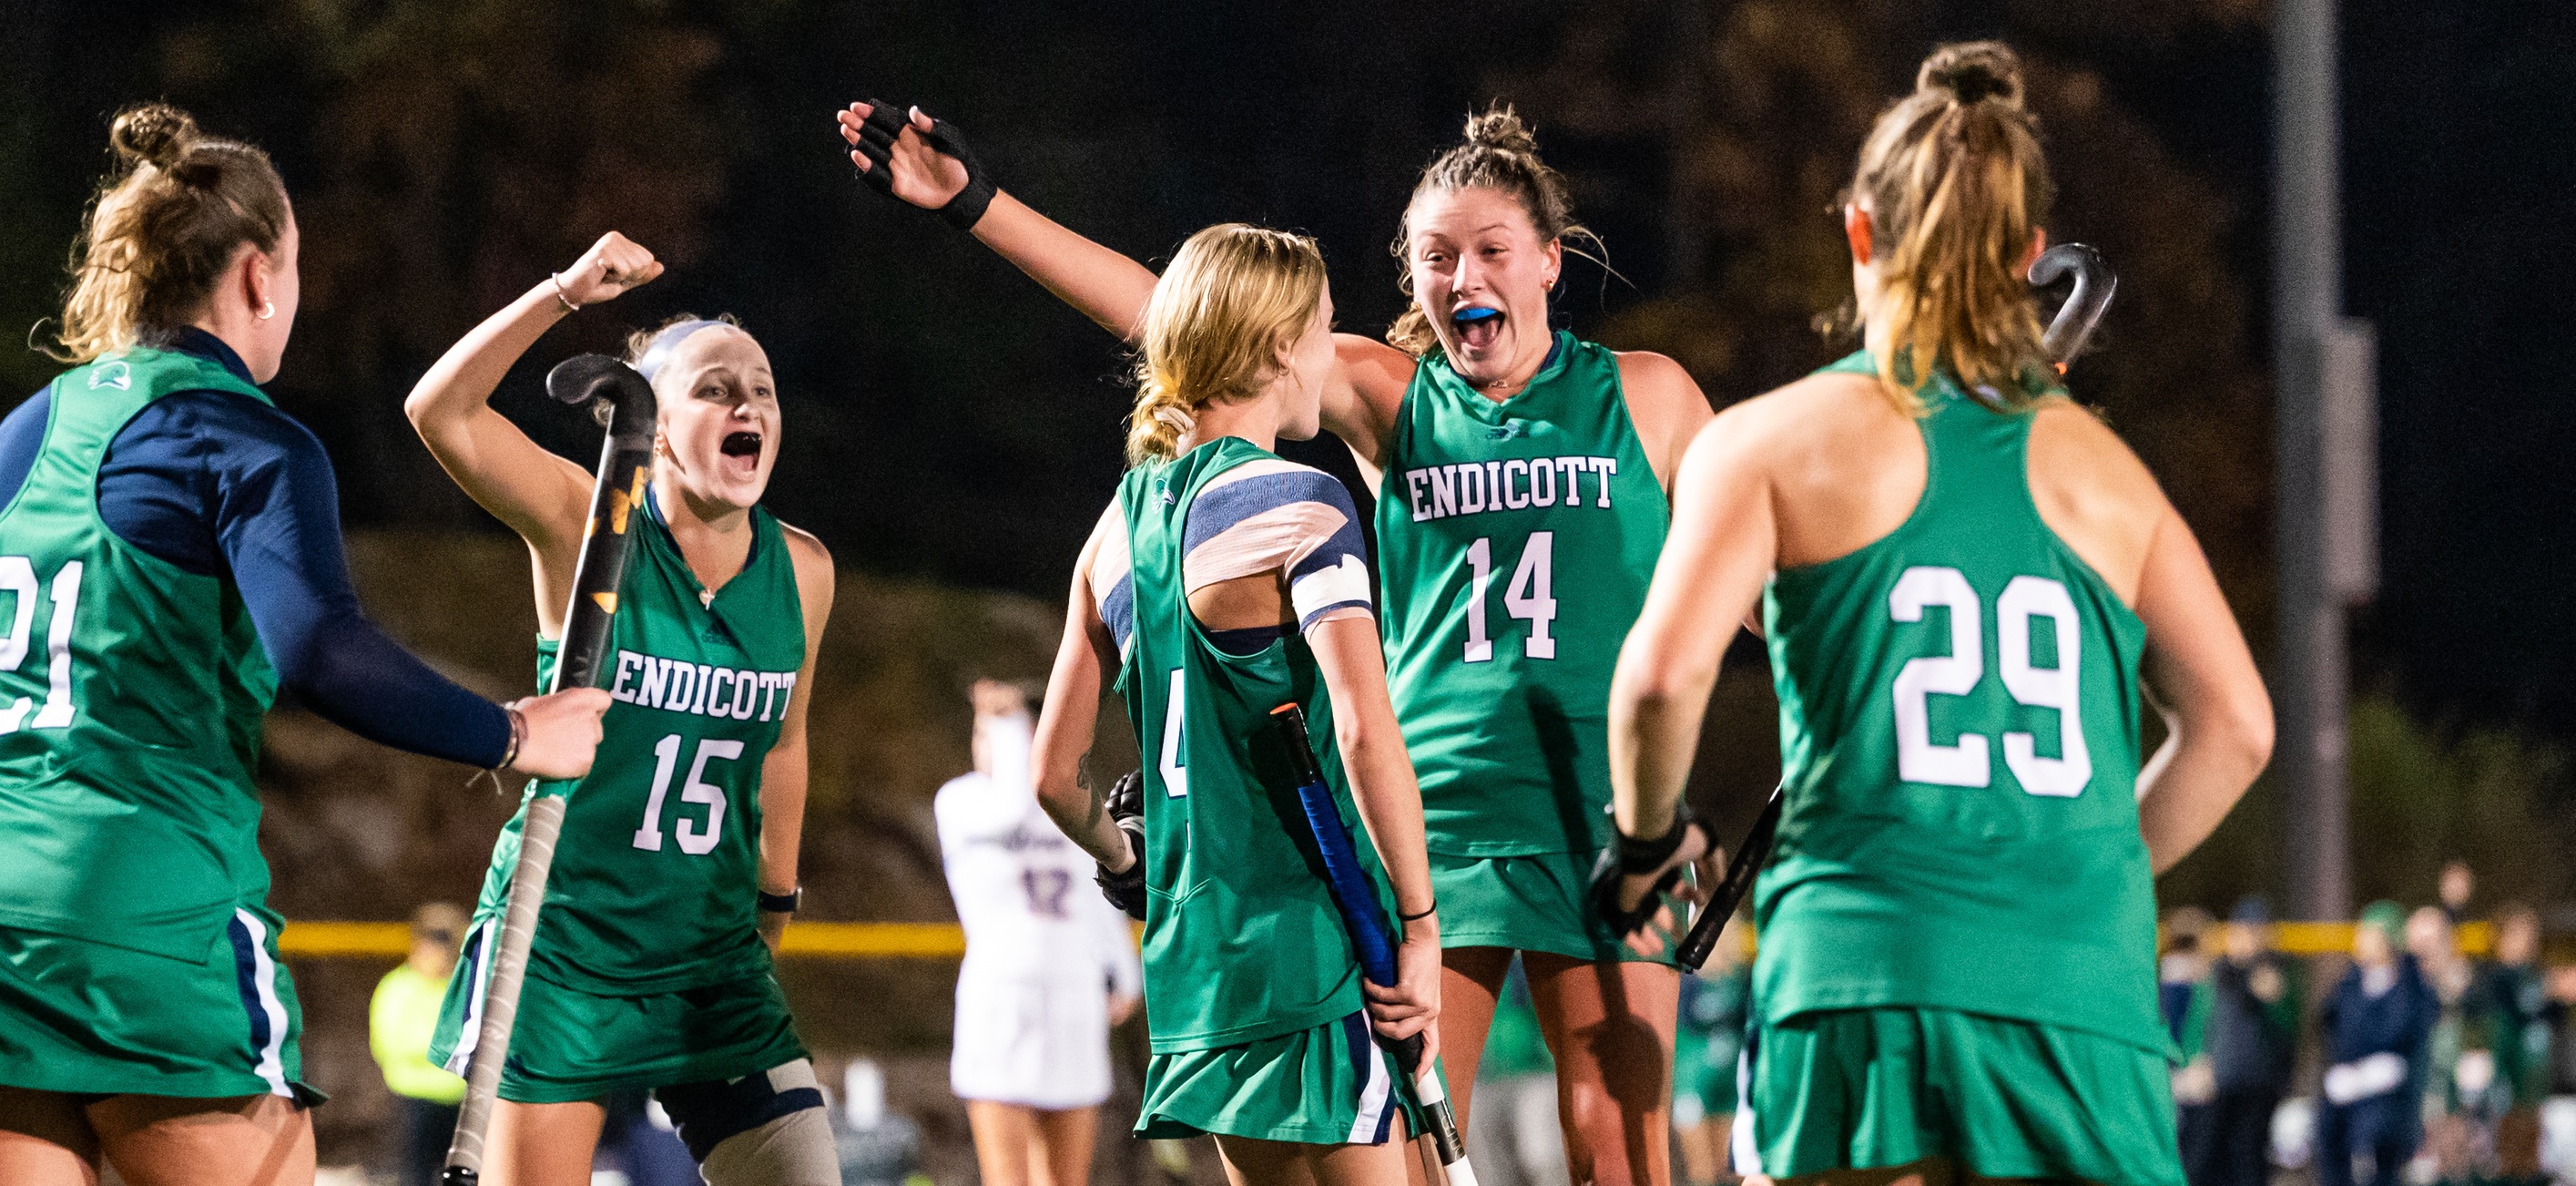 CCC CHAMPIONSHIP: No. 2 Endicott Visits No. 1 UNE This Saturday For Conference Crown (1 PM)